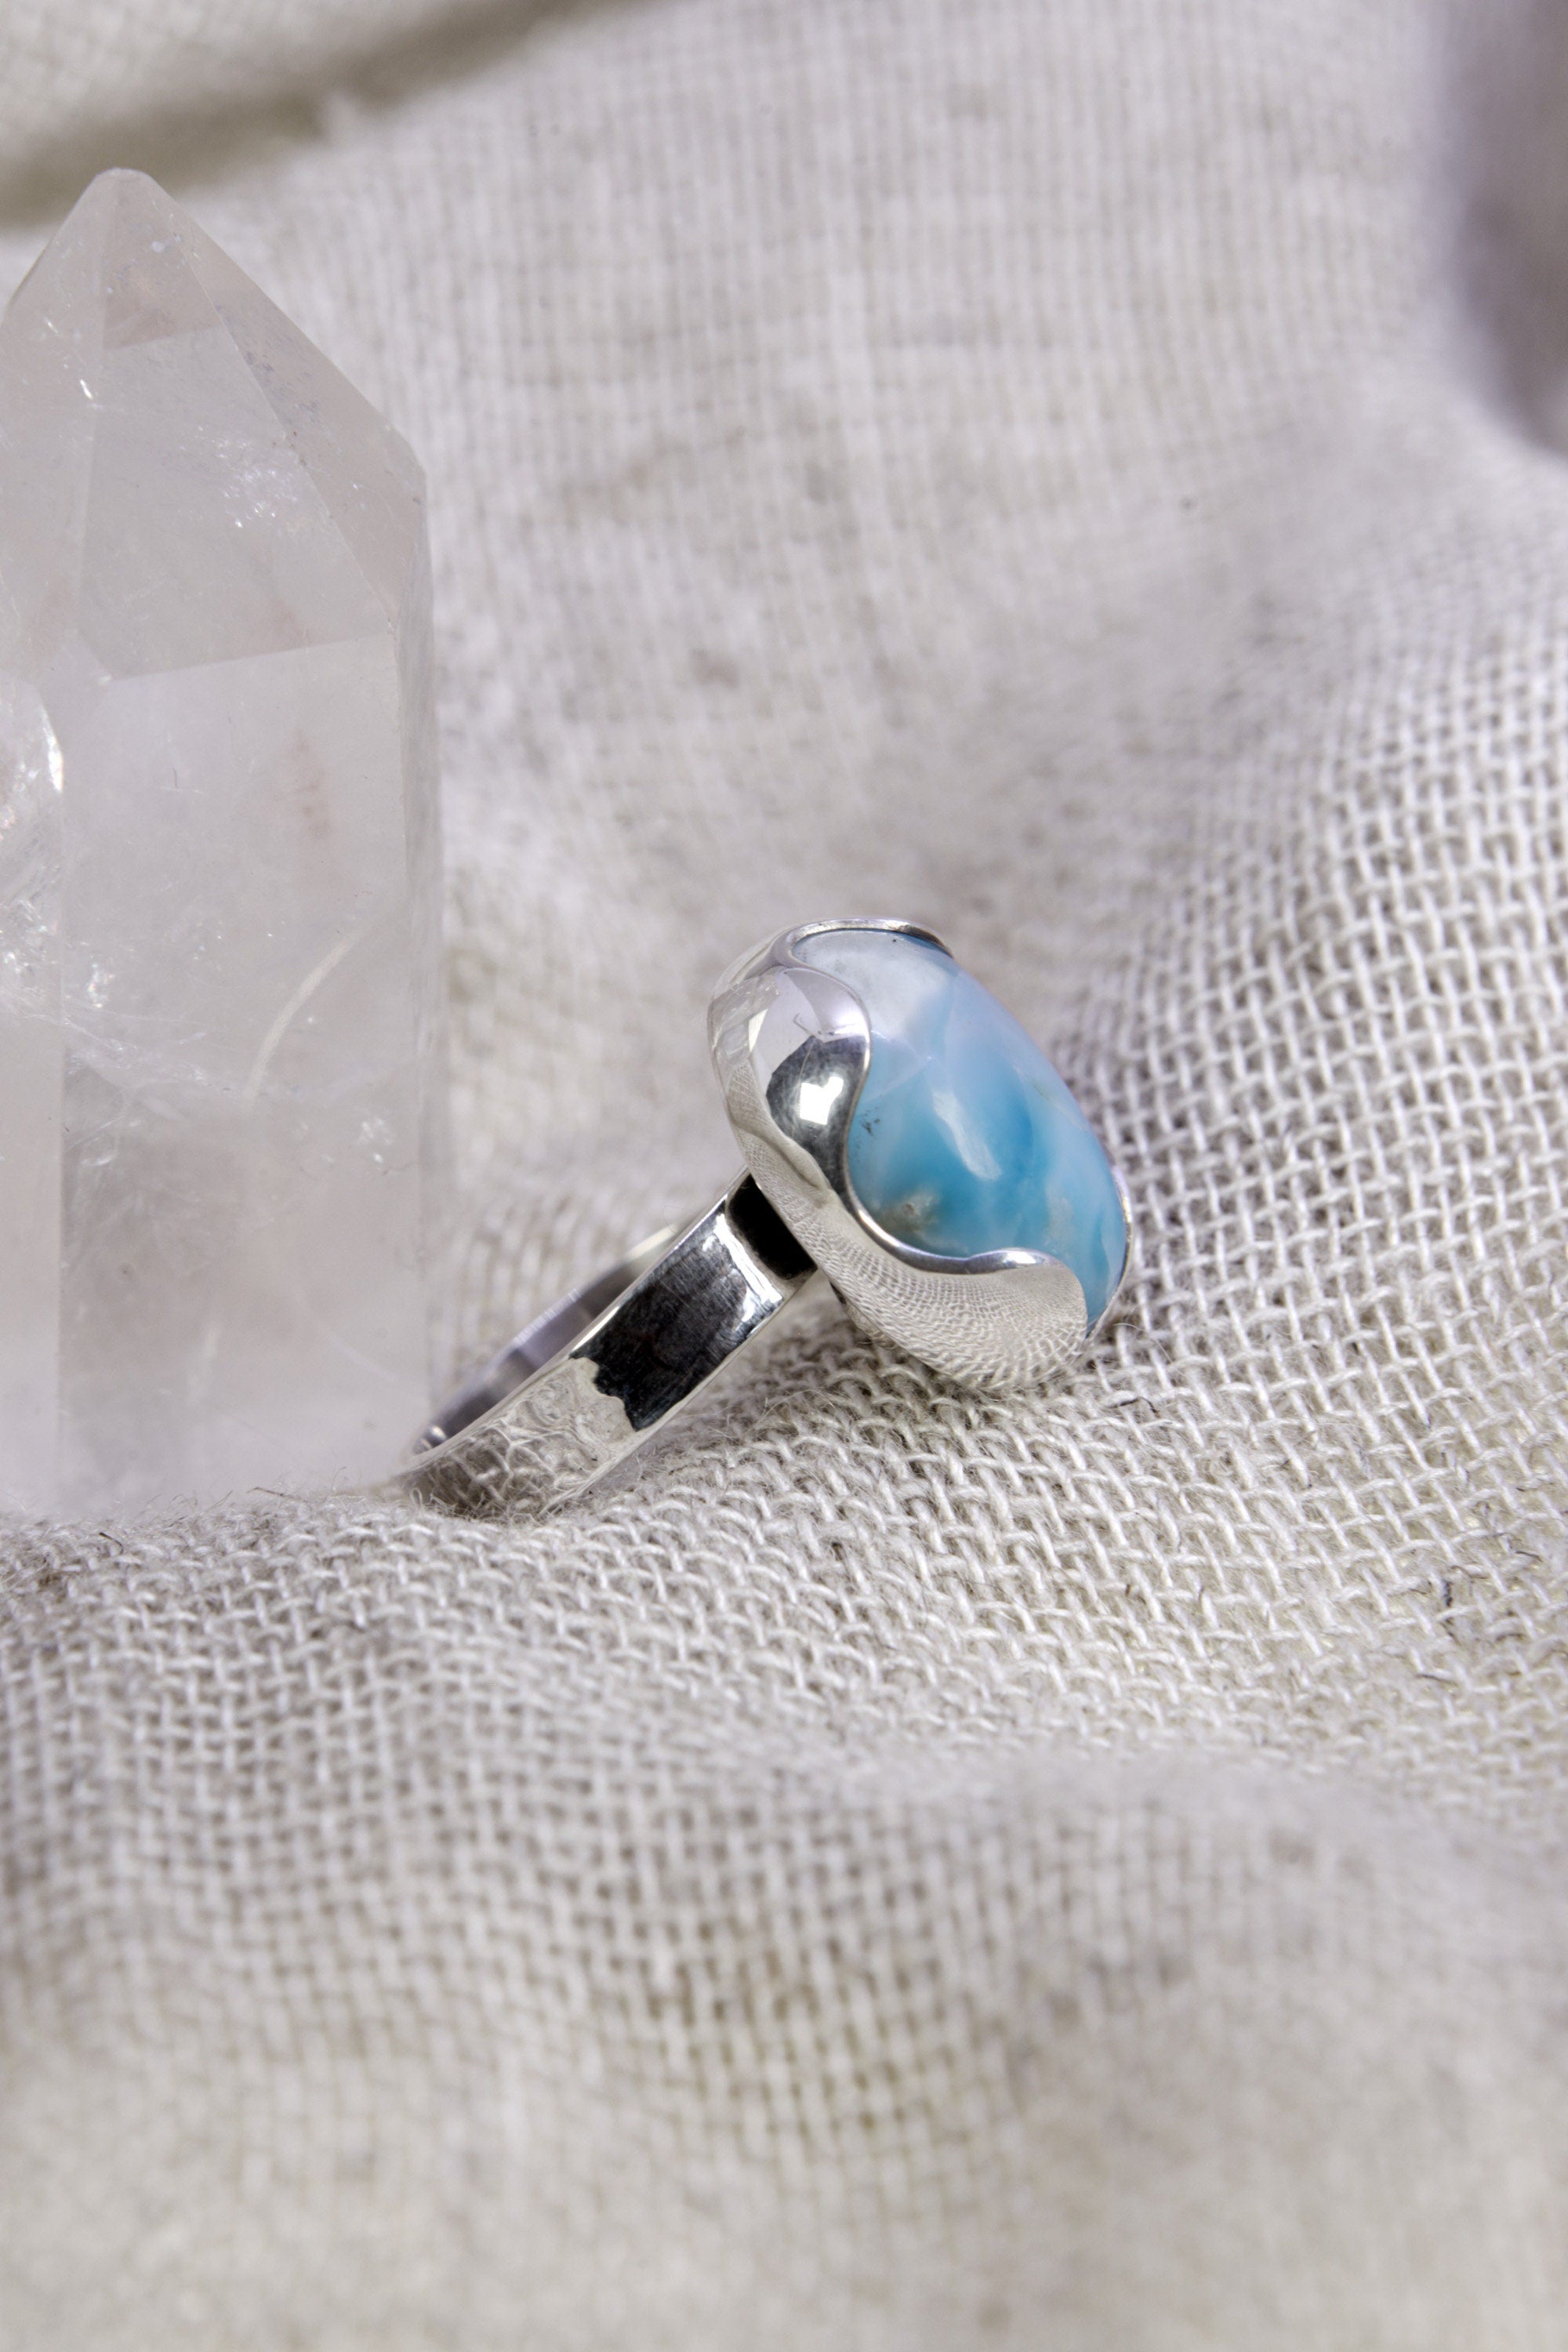 A Tribute to Oceanic Splendor: Adjustable Sterling Silver Ring with Oval Larimar - Unisex - Size 5-12 US - NO/04